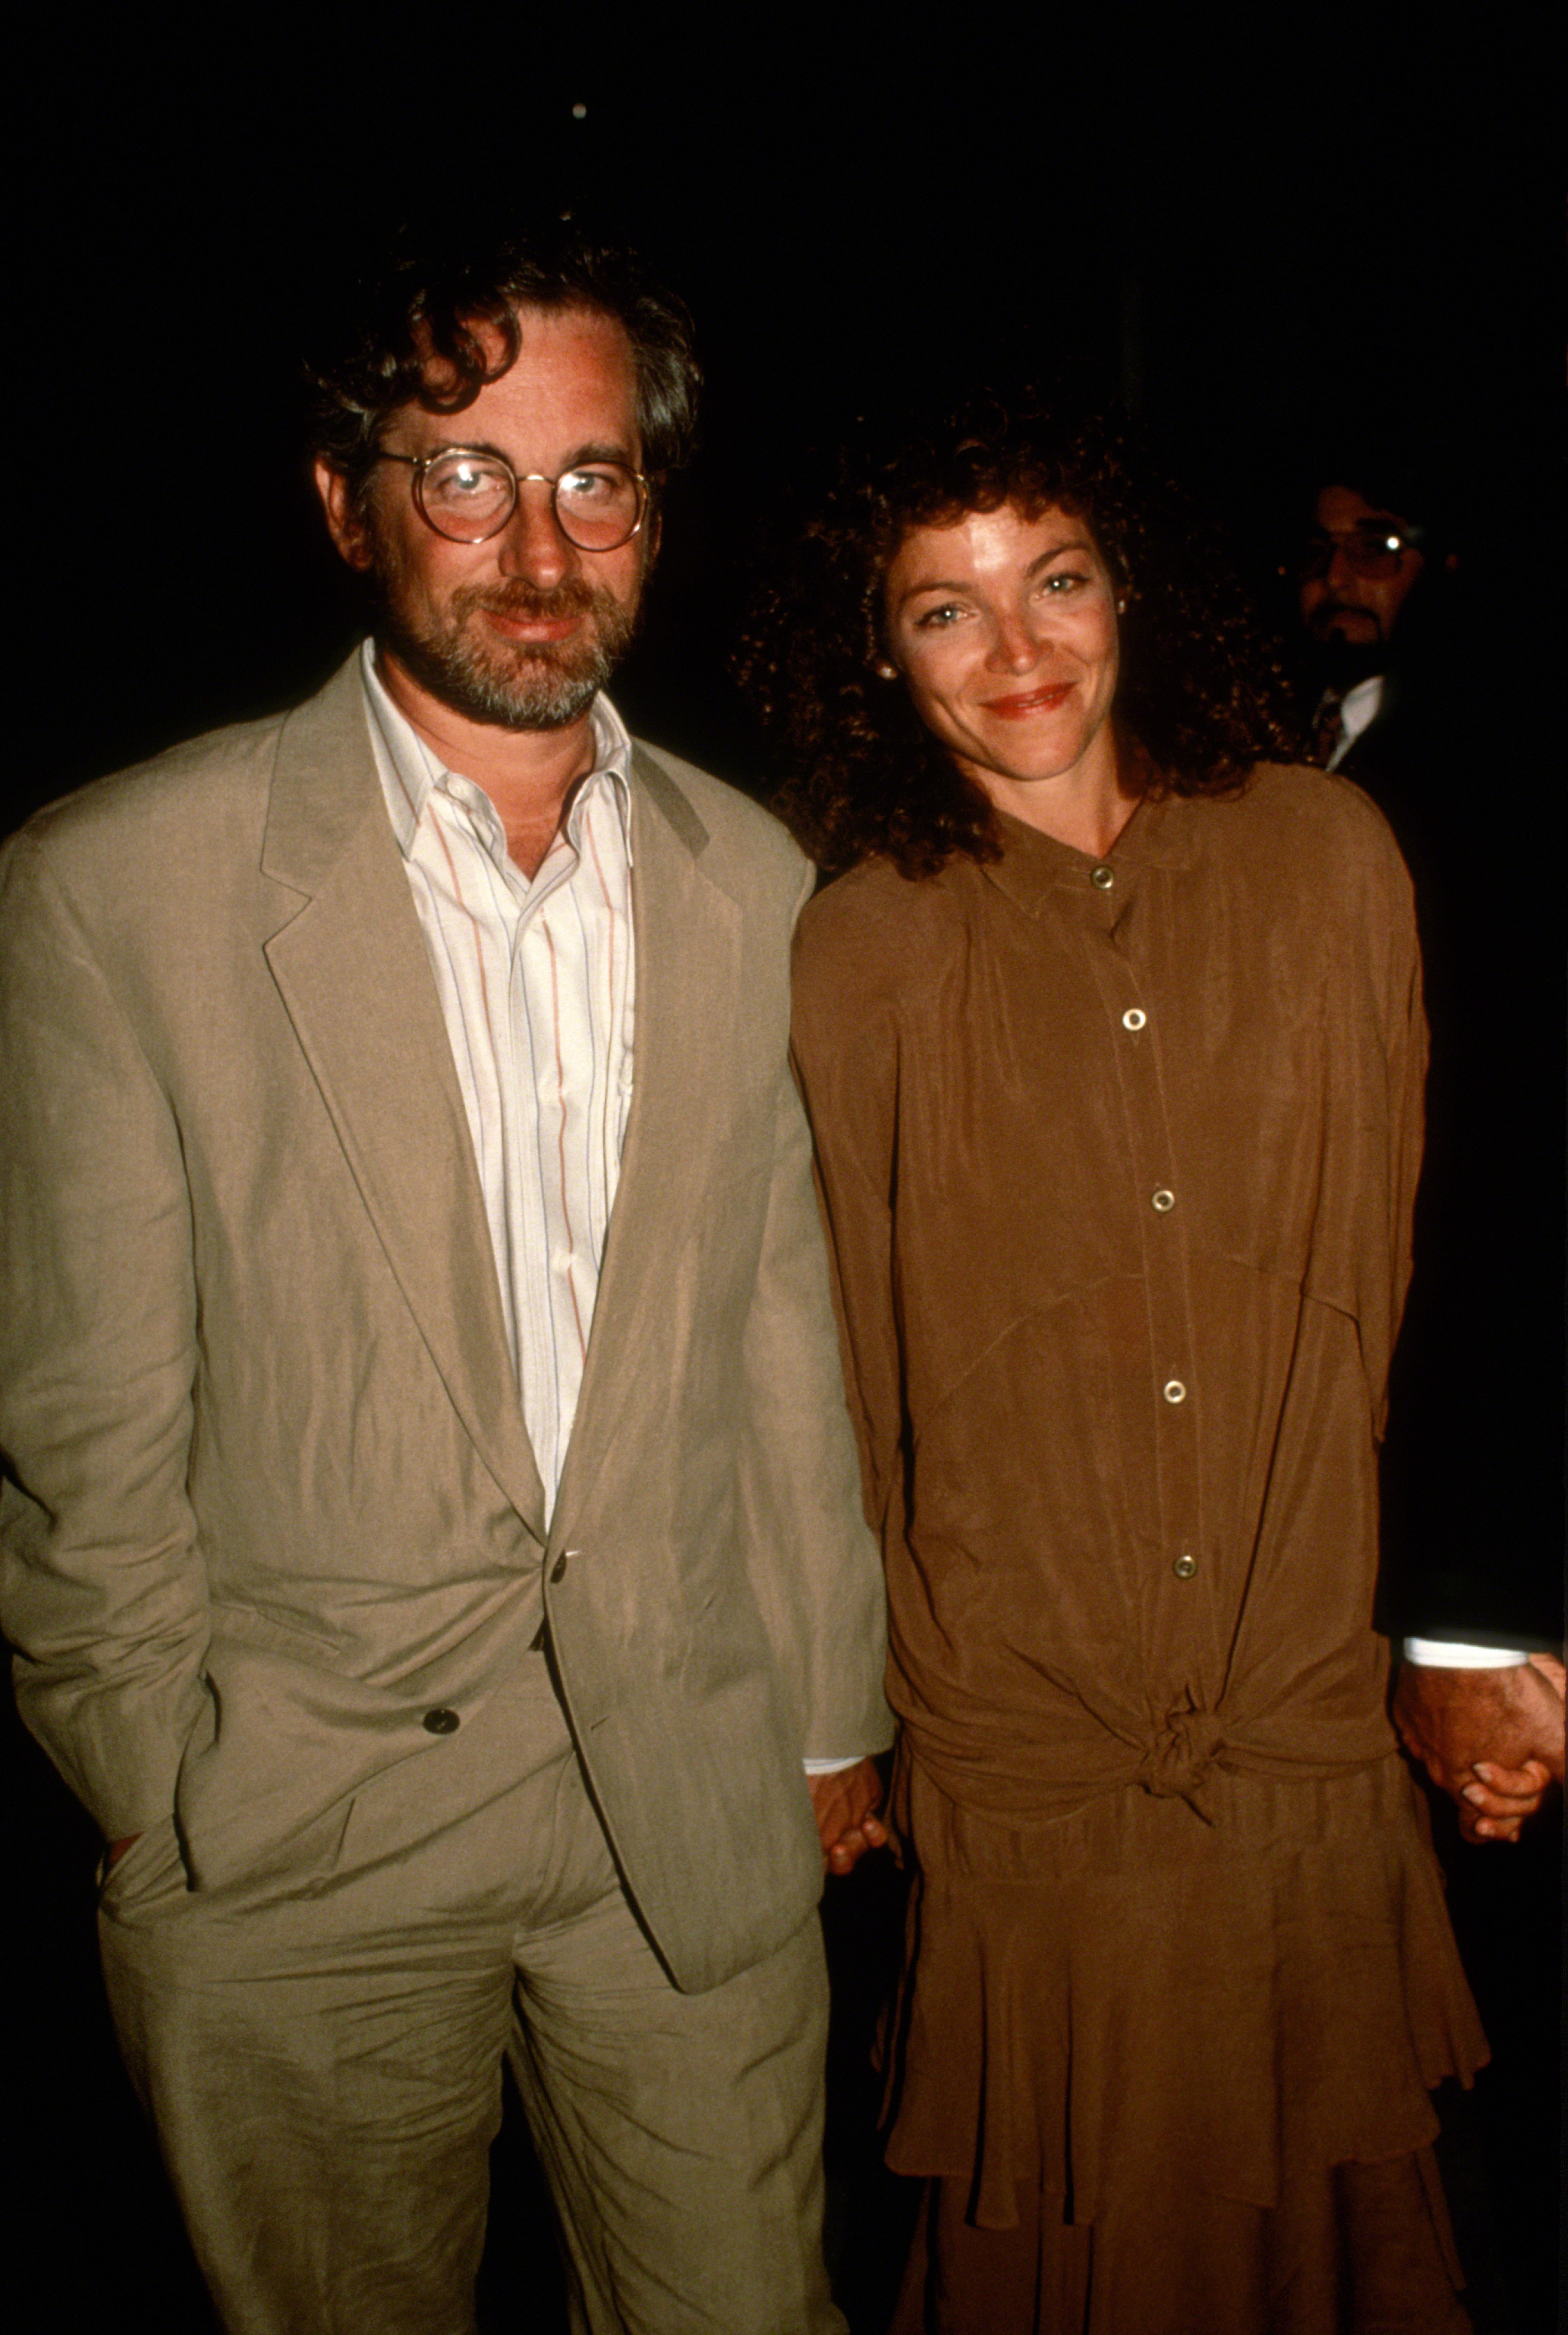 Prior to Kate, Steven Spielberg was married to actress Amy Irving